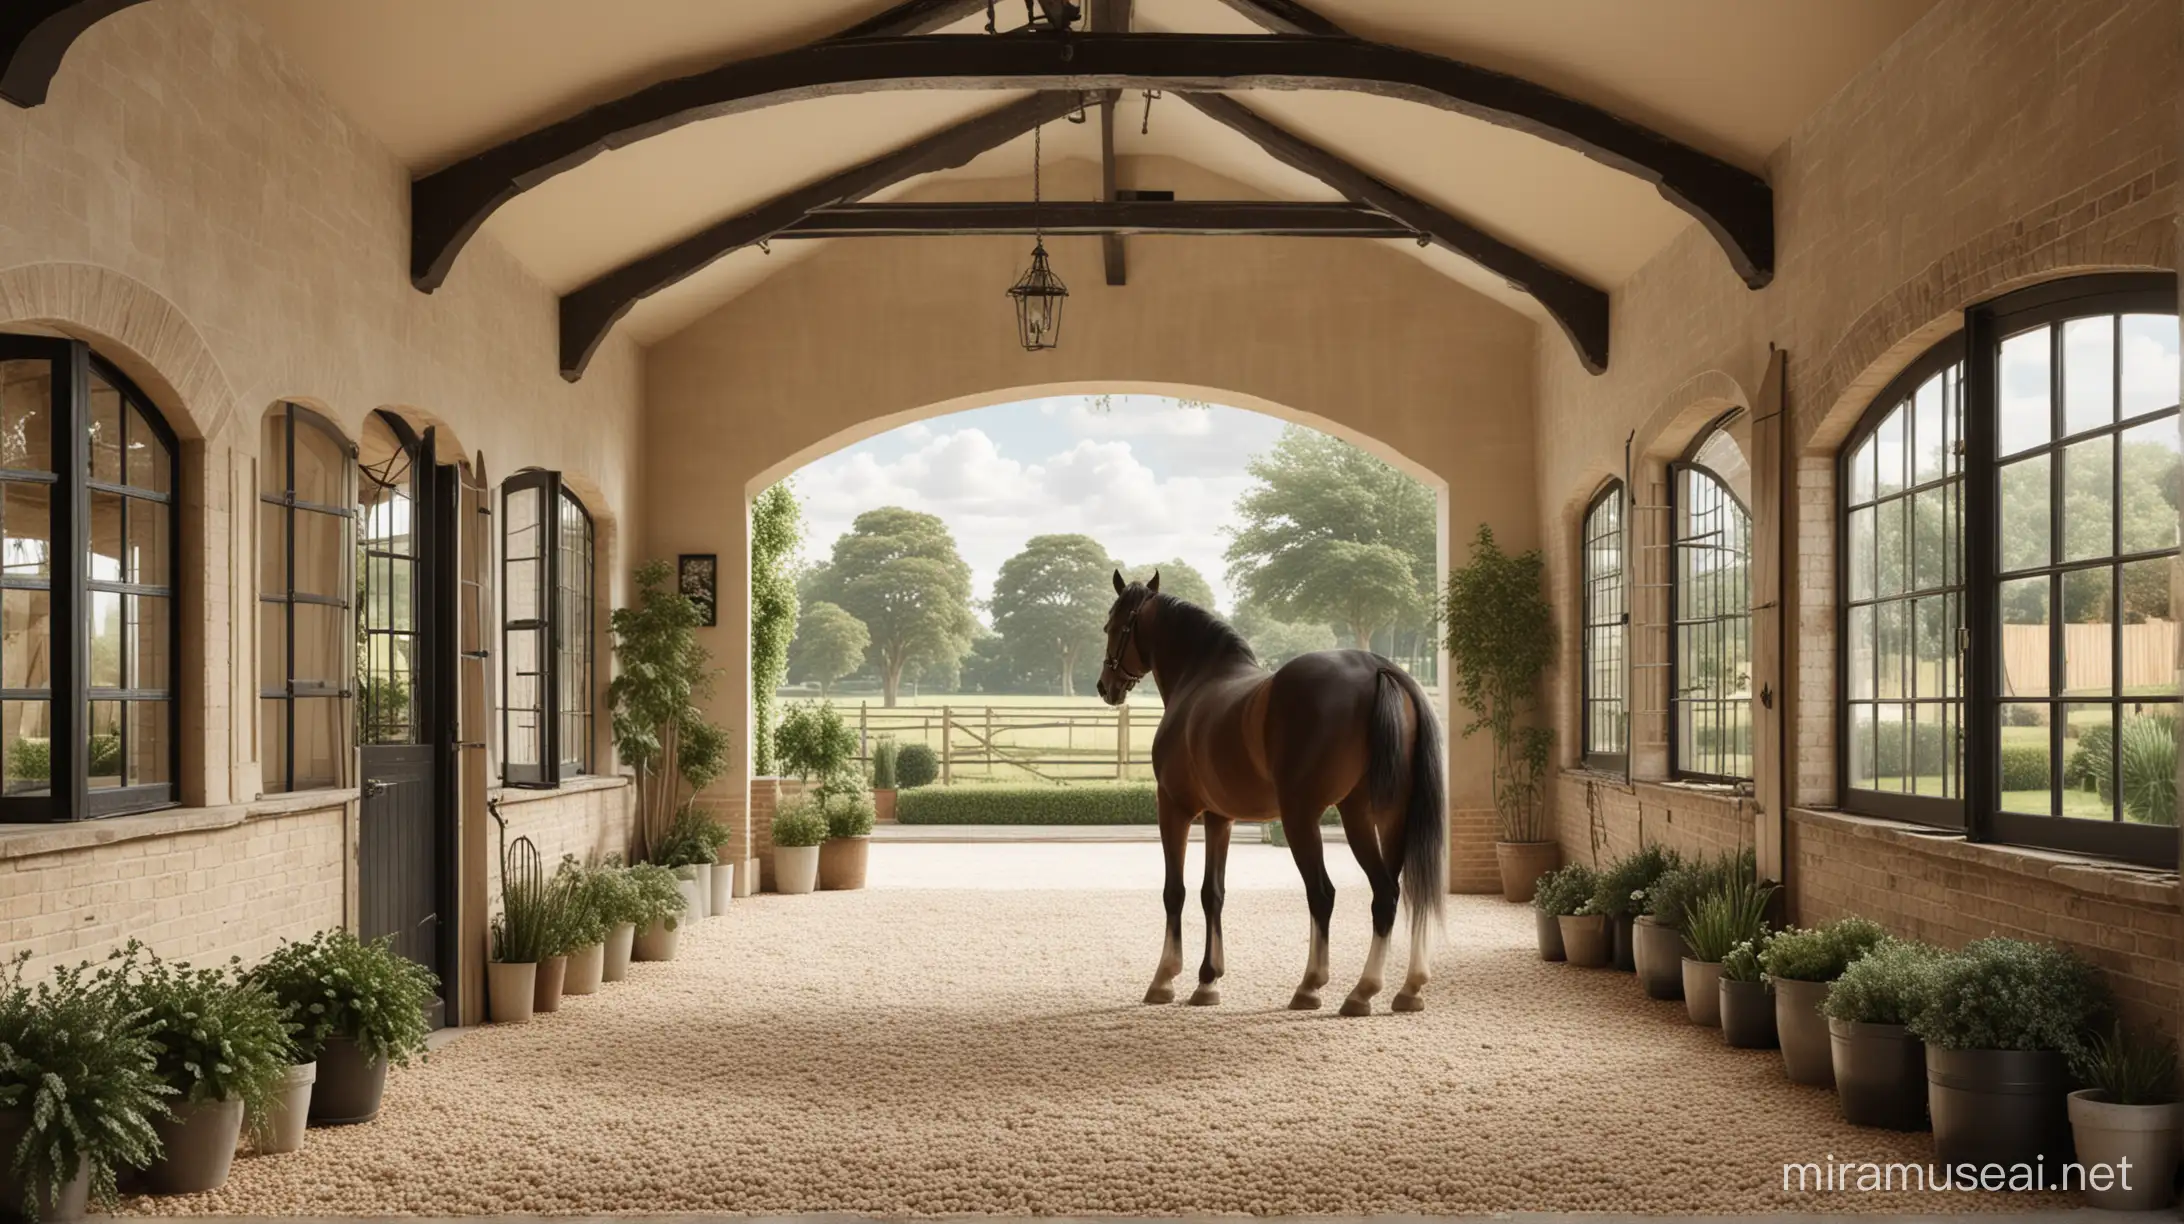 hyperrealistic image of the inside of an English country horse stable; beige, ivory and black, symmetrical, plants, natural light from big window, open archway showing outside scenery, brick floor